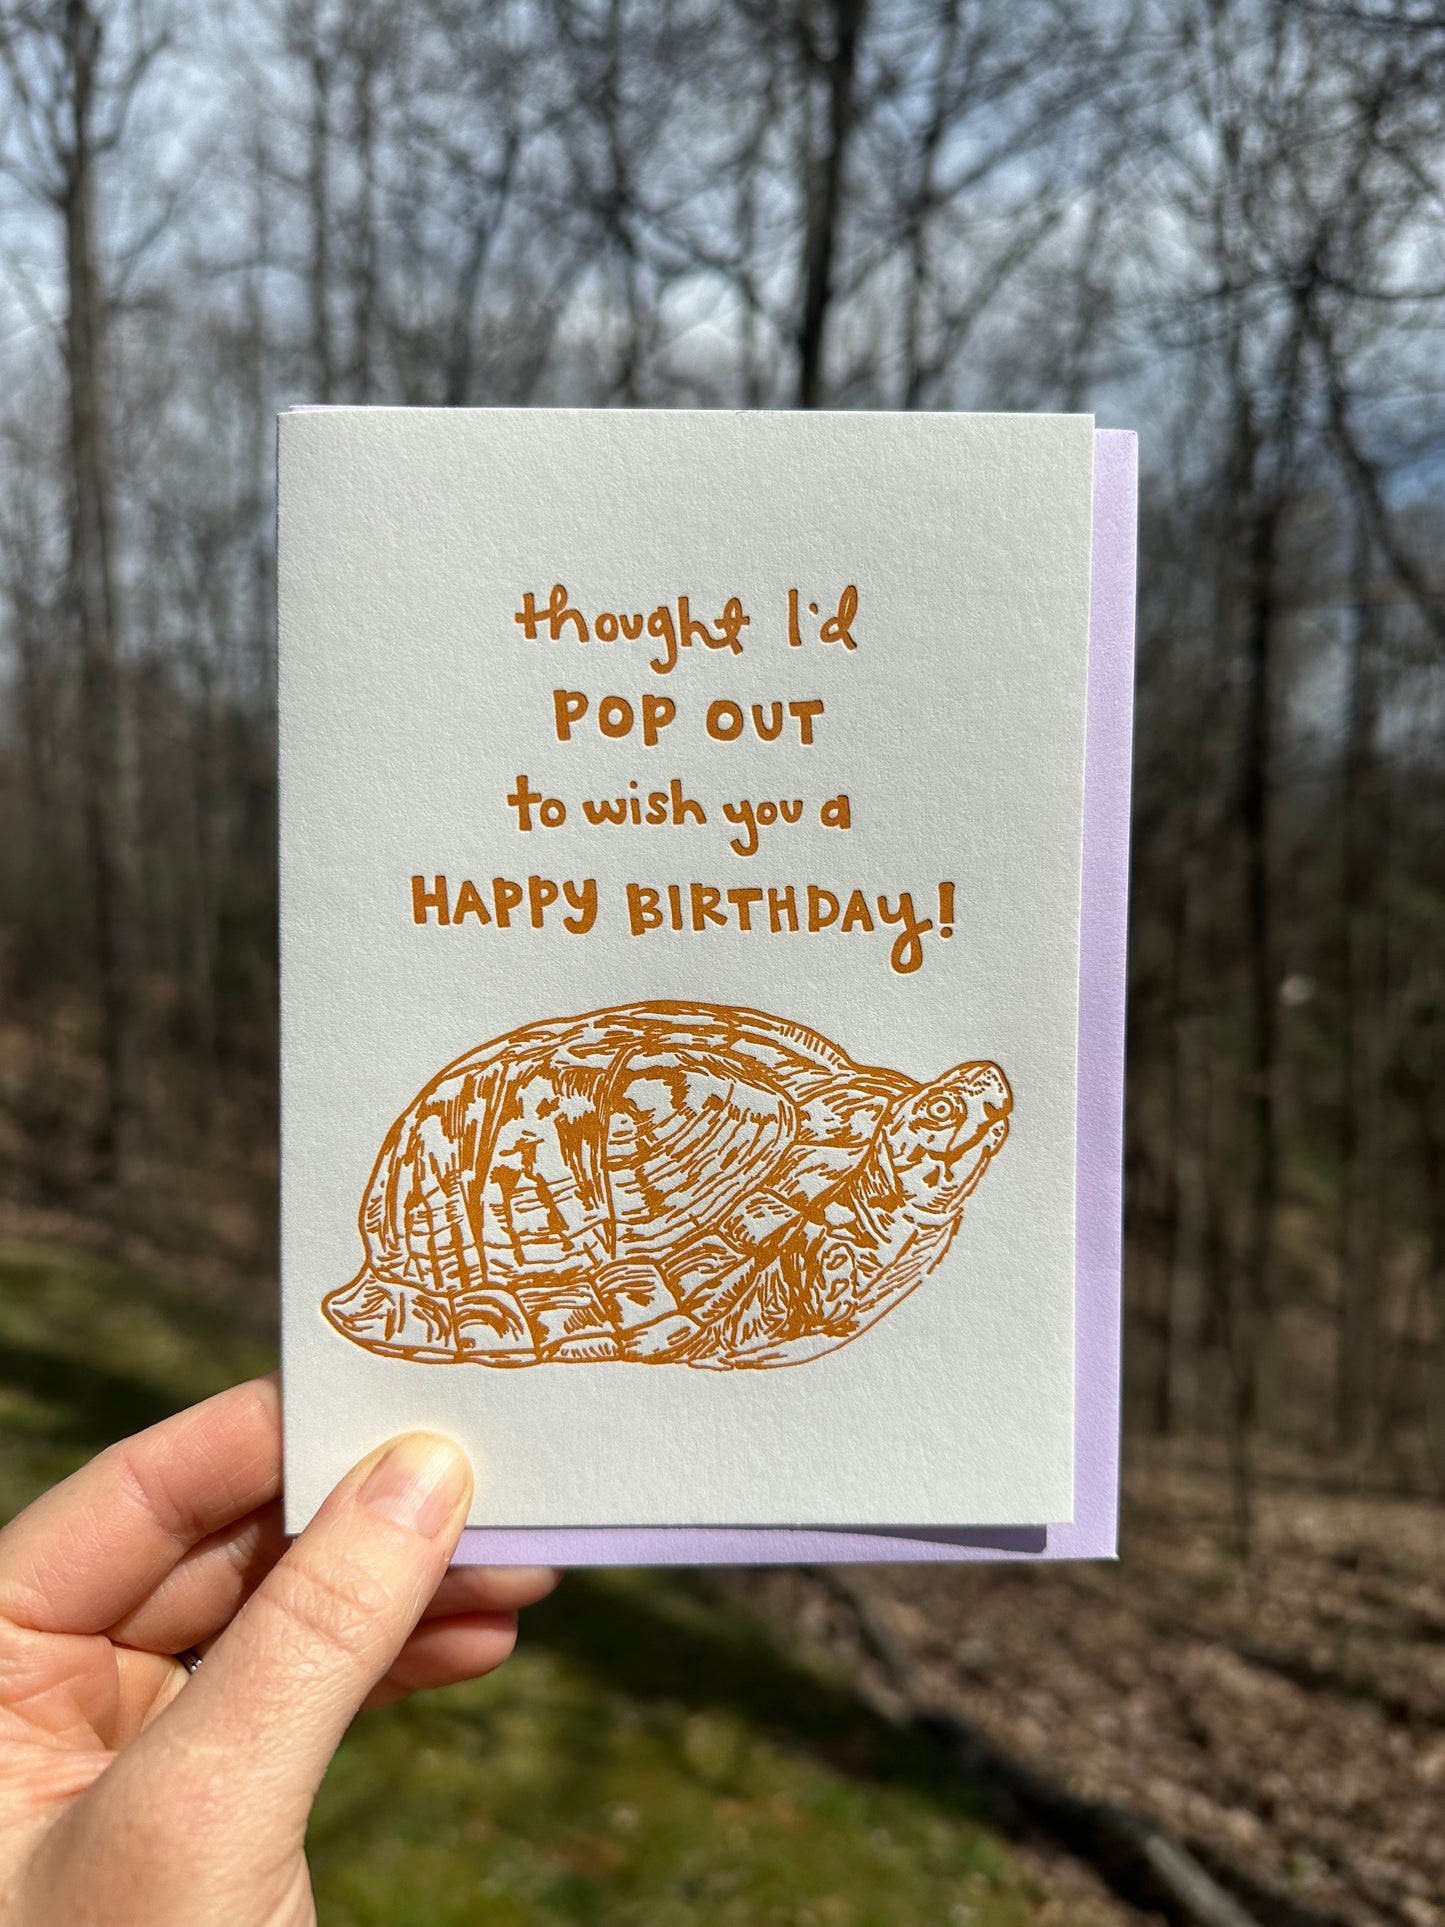 Letterpress greeting card featuring a hand-drawn Appalachian Box Turtle printed in a vibrant dark orange ink. "Thought I'd pop out to wish you a Happy Birthday!" is written on the top of the card in a whimsical hand-drawn text, in the same orange ink. The card is white, blank inside, and is paired with a lilac purple envelope. Card is held up outside in front of a spring forest on a sunny day. 